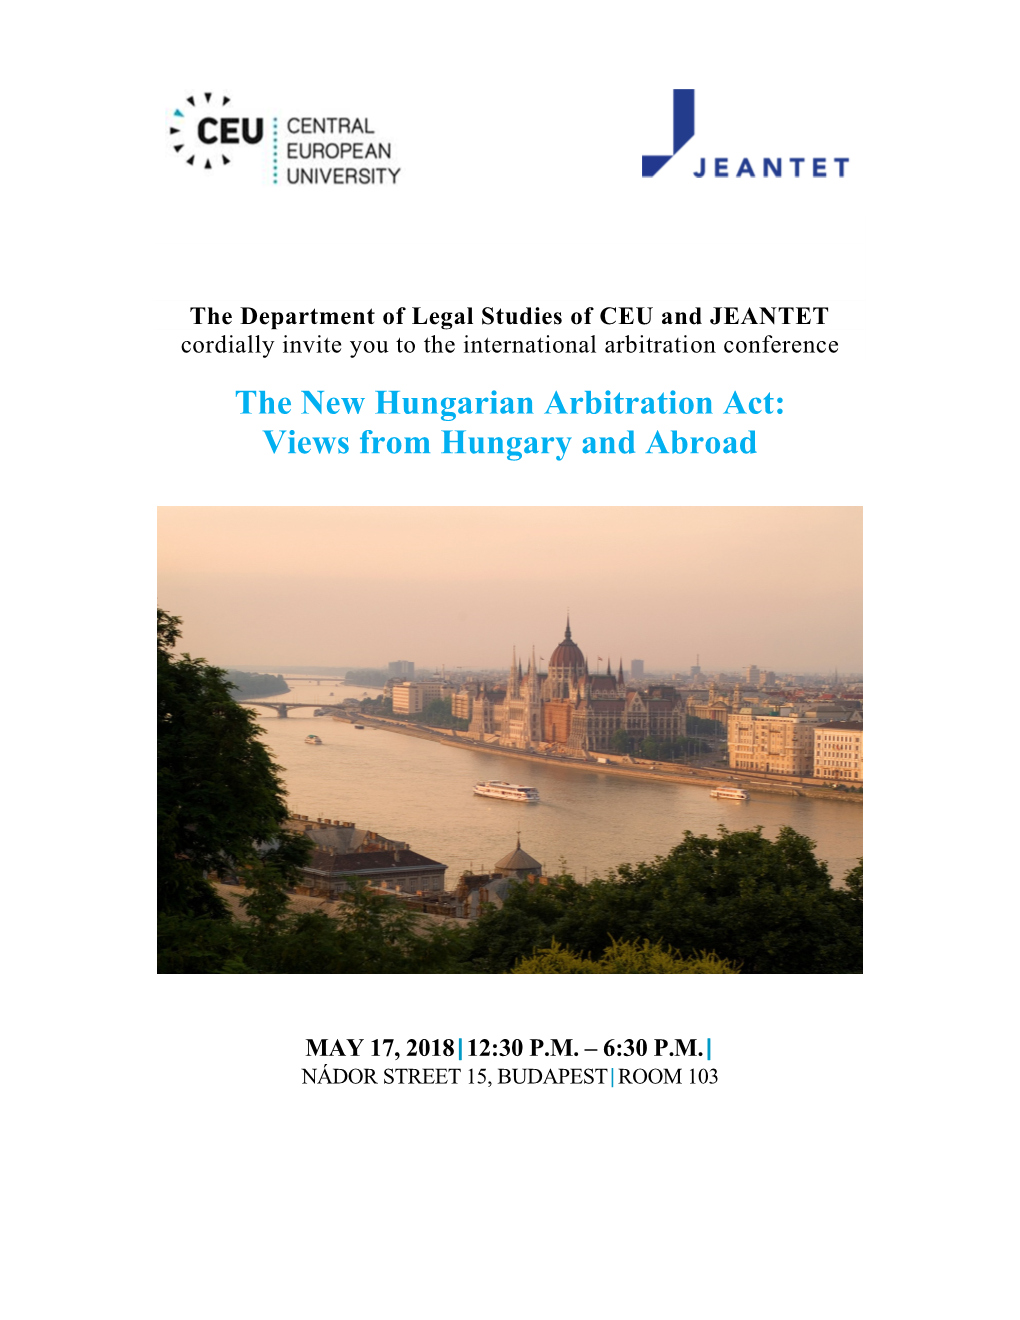 The New Hungarian Arbitration Act: Views from Hungary and Abroad